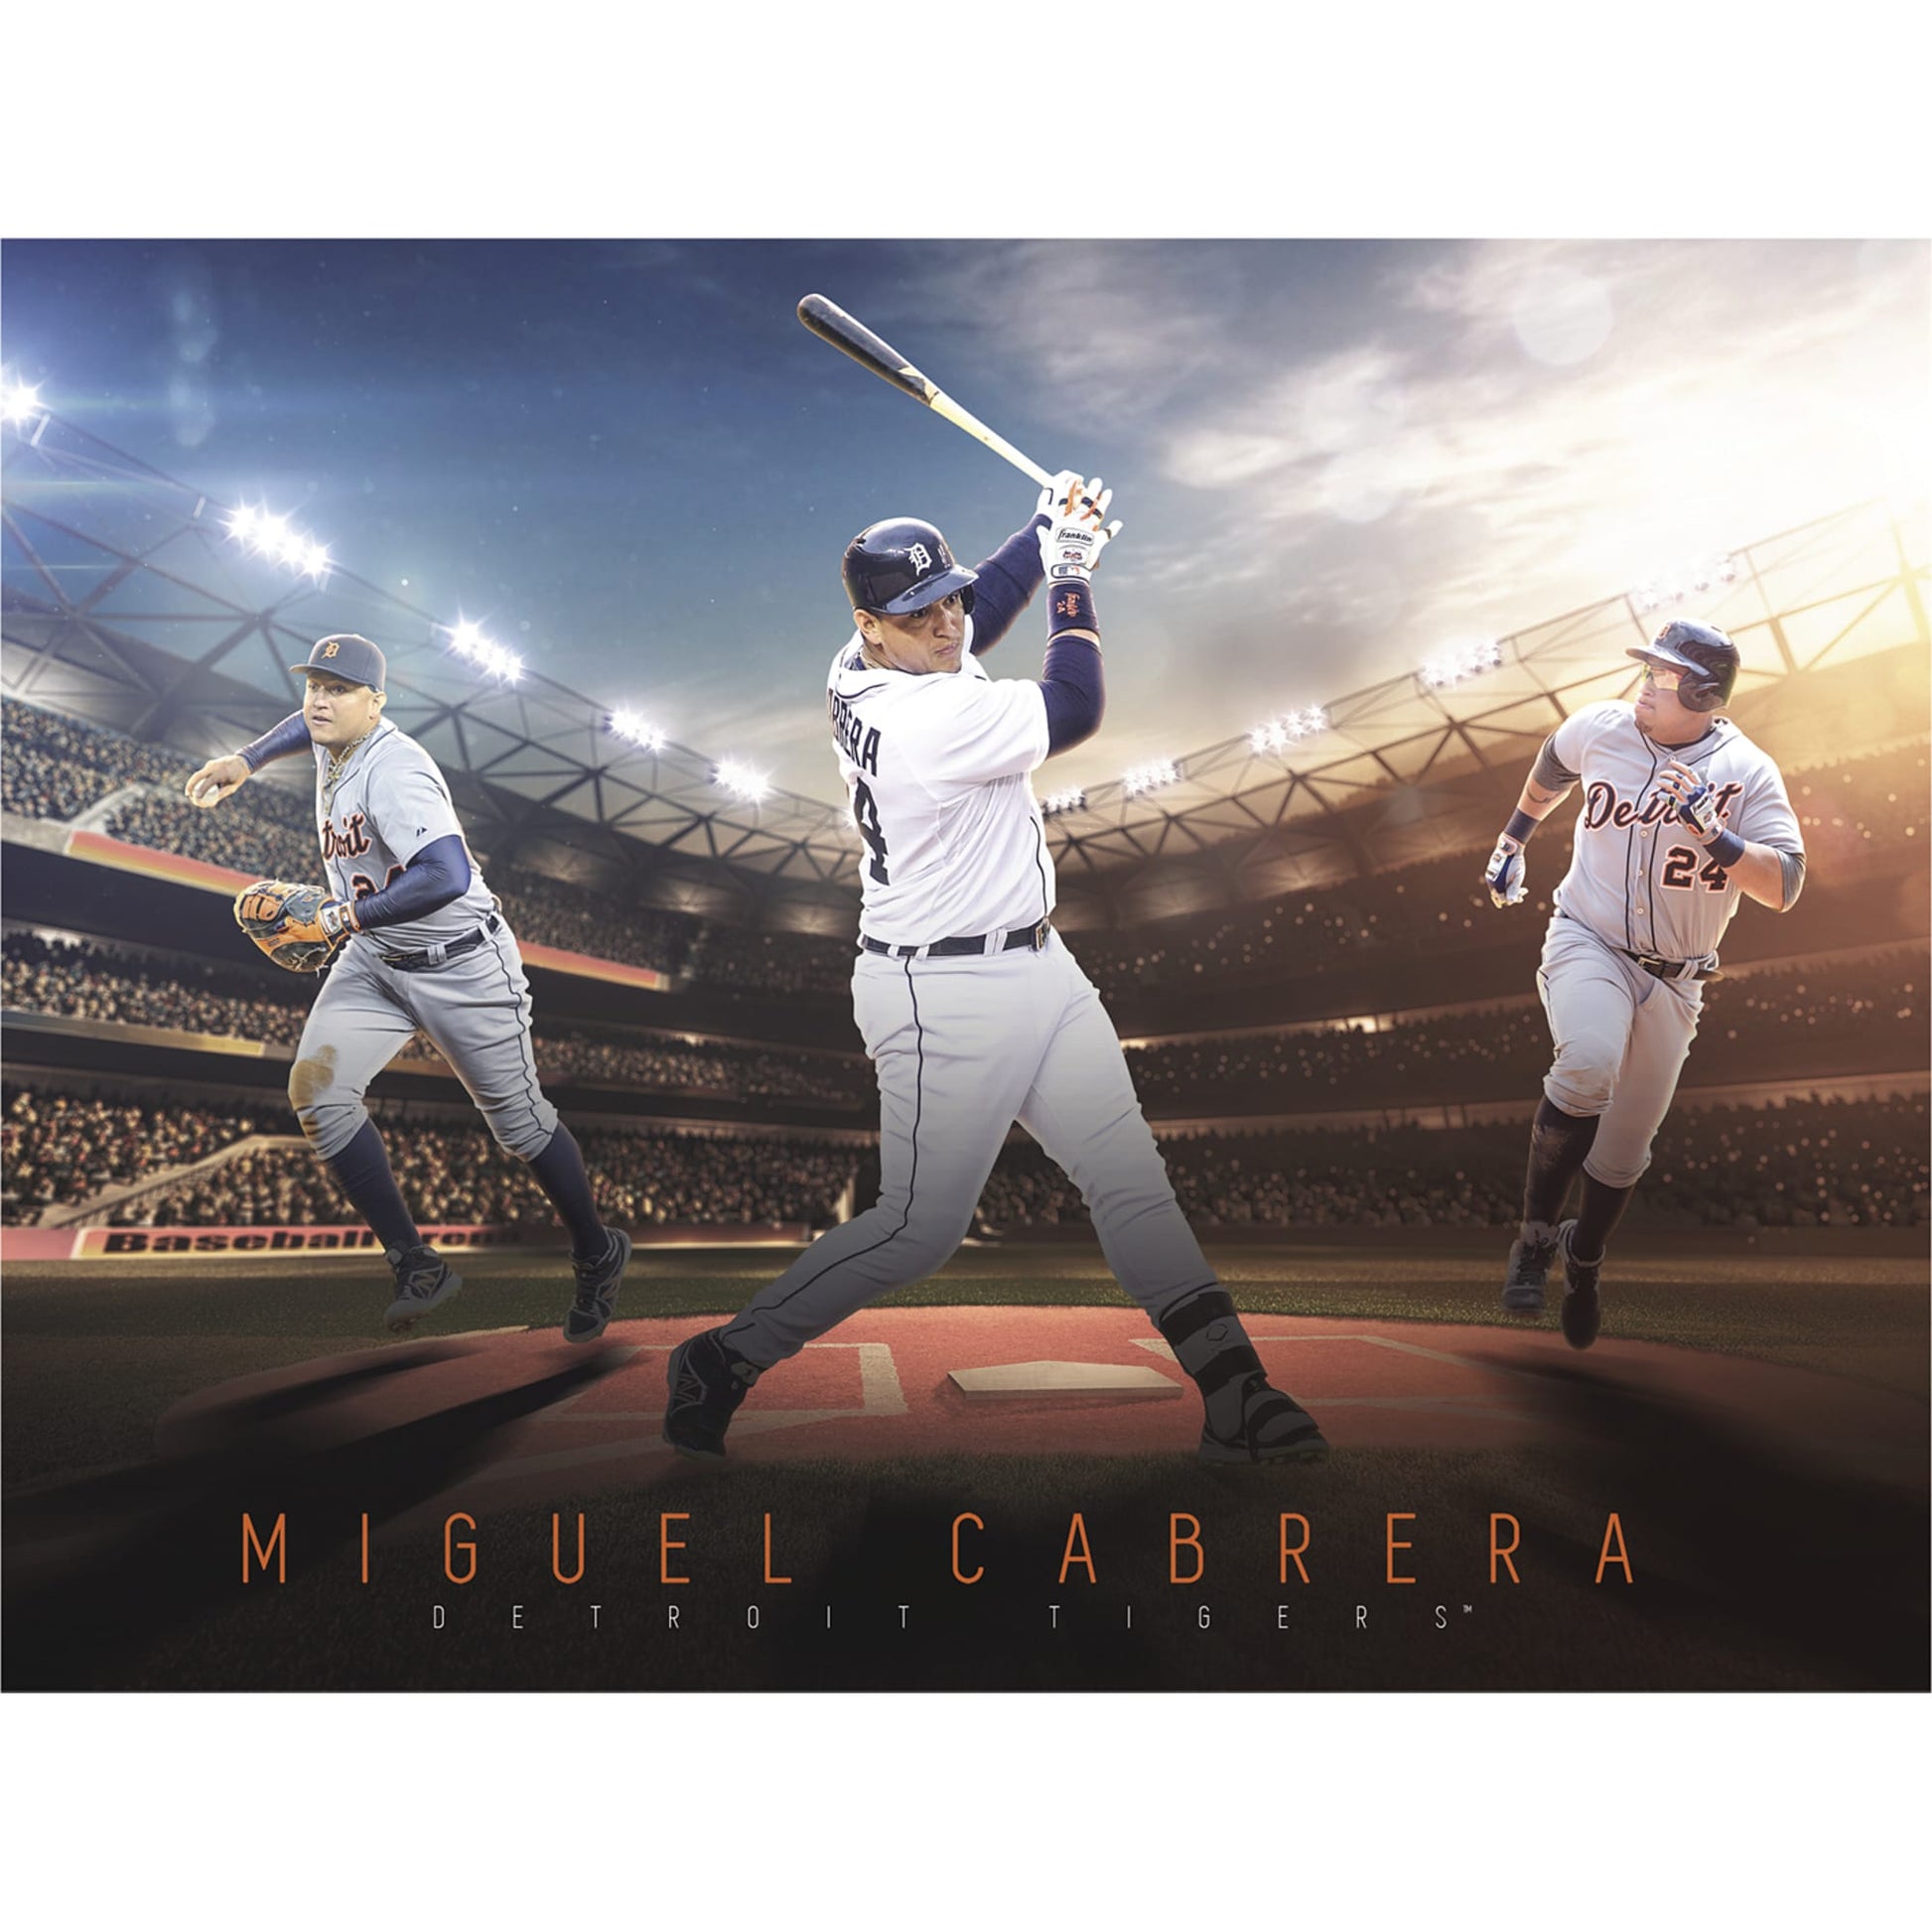 Fathead Miguel Cabrera Detroit Tigers Giant Removable Wall Mural